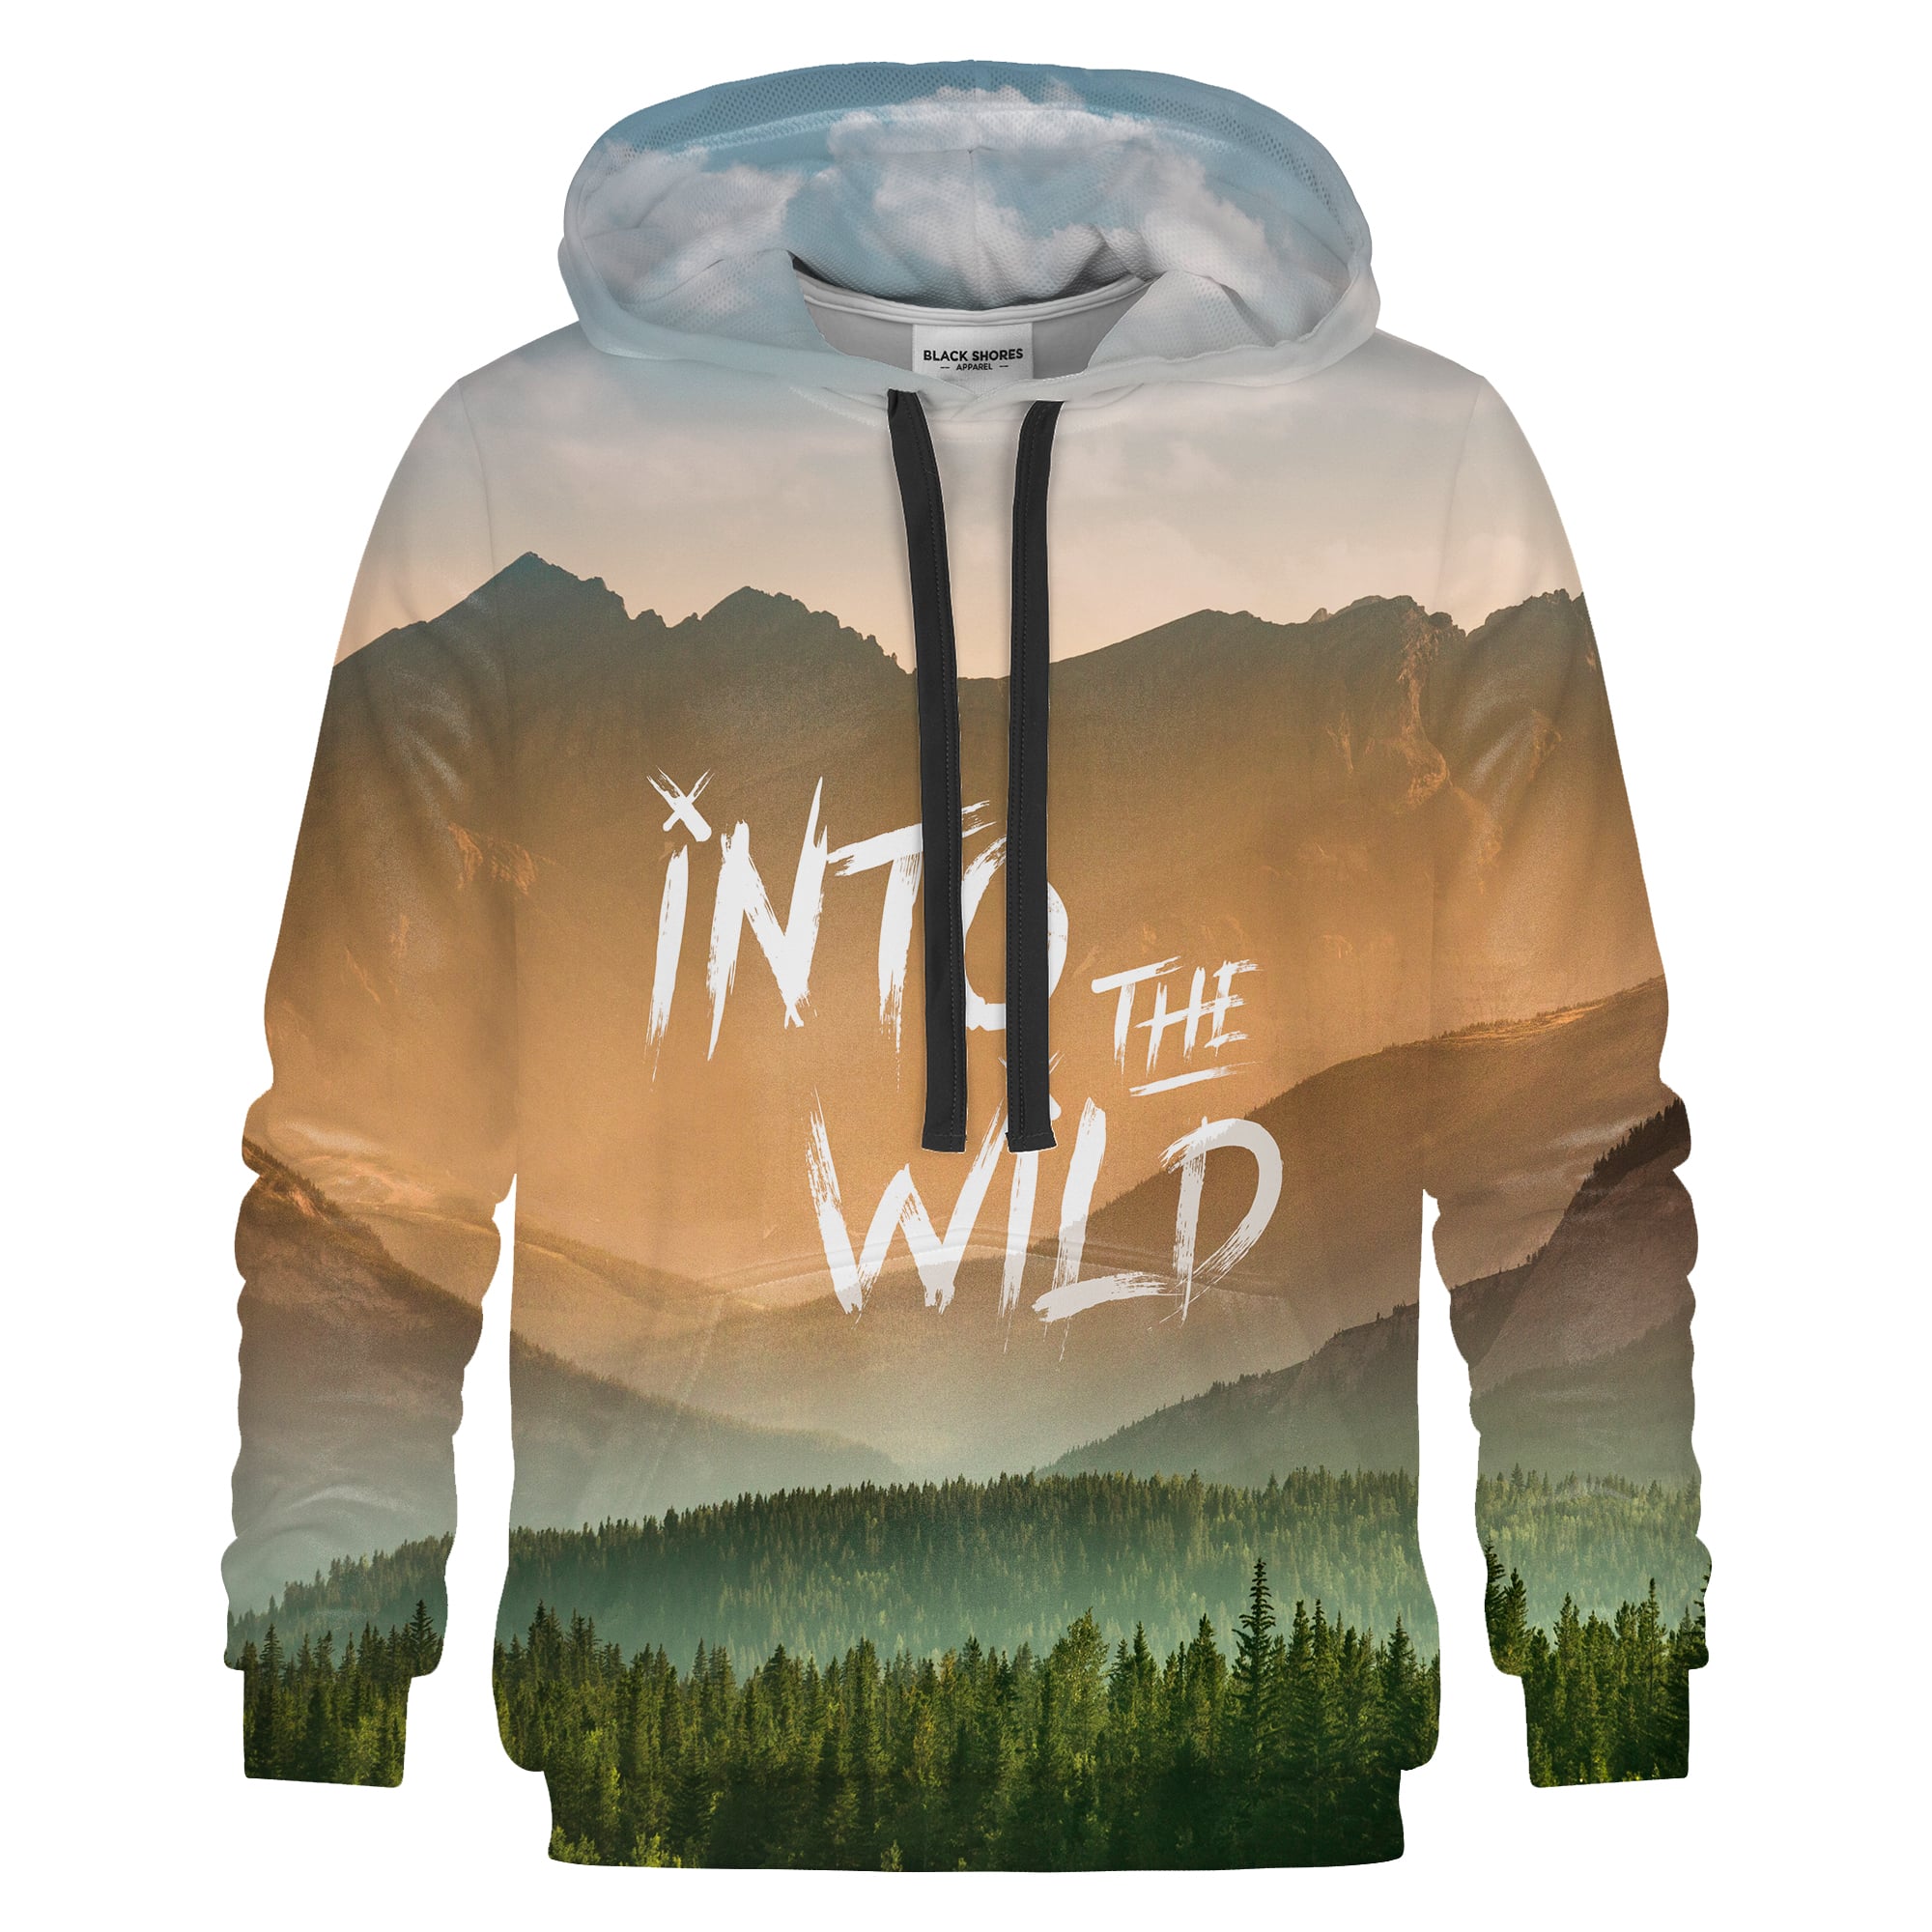 Into The Wild Hoodie - Black Shores - XL